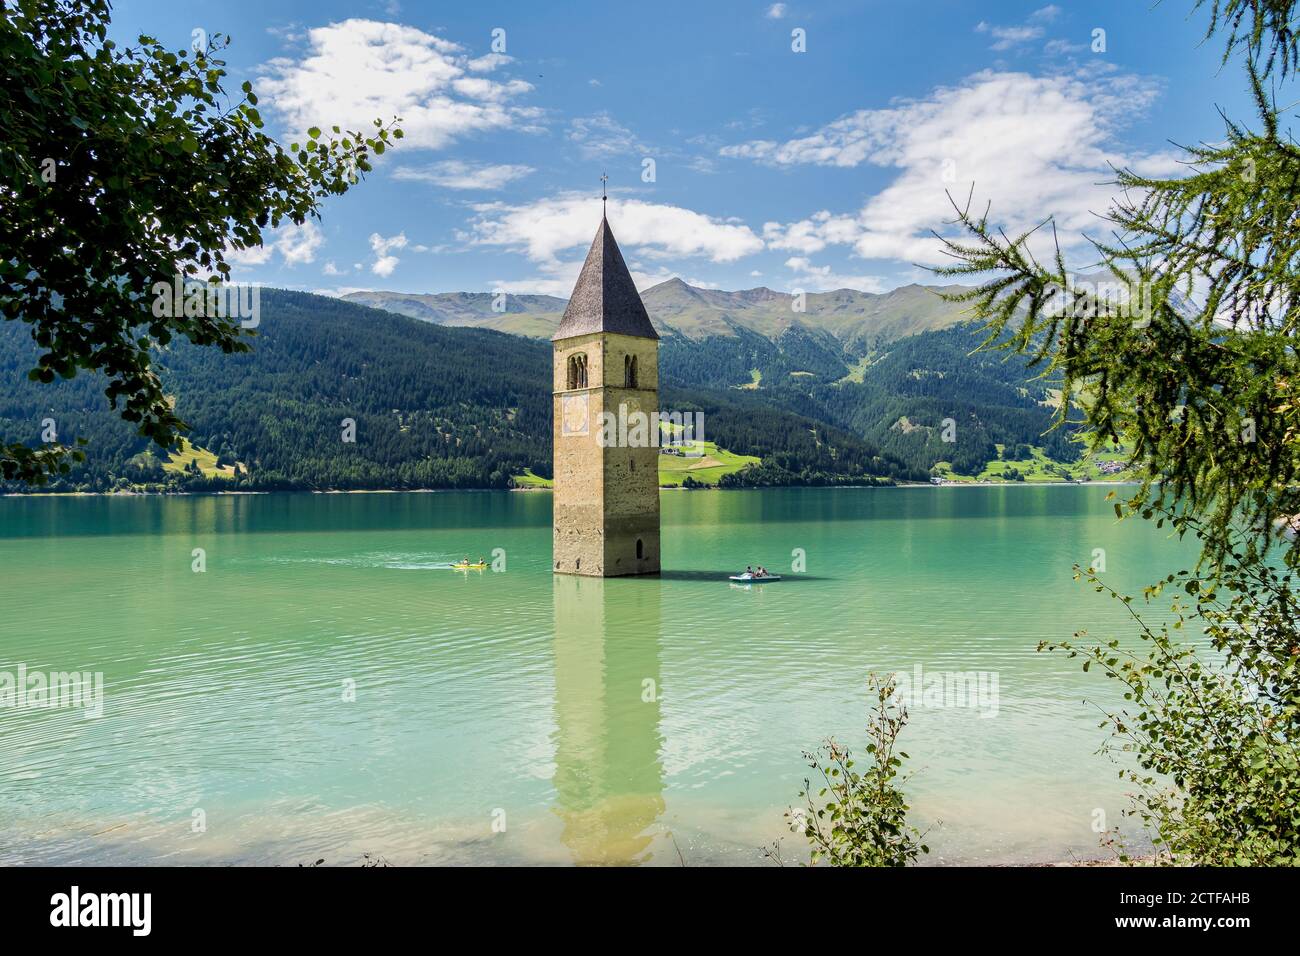 The famous bell tower in the Lake of Reschen - Lago di Resia in South Tyrol, Italy. During WW2 a dam was build and put the village under water, only t Stock Photo